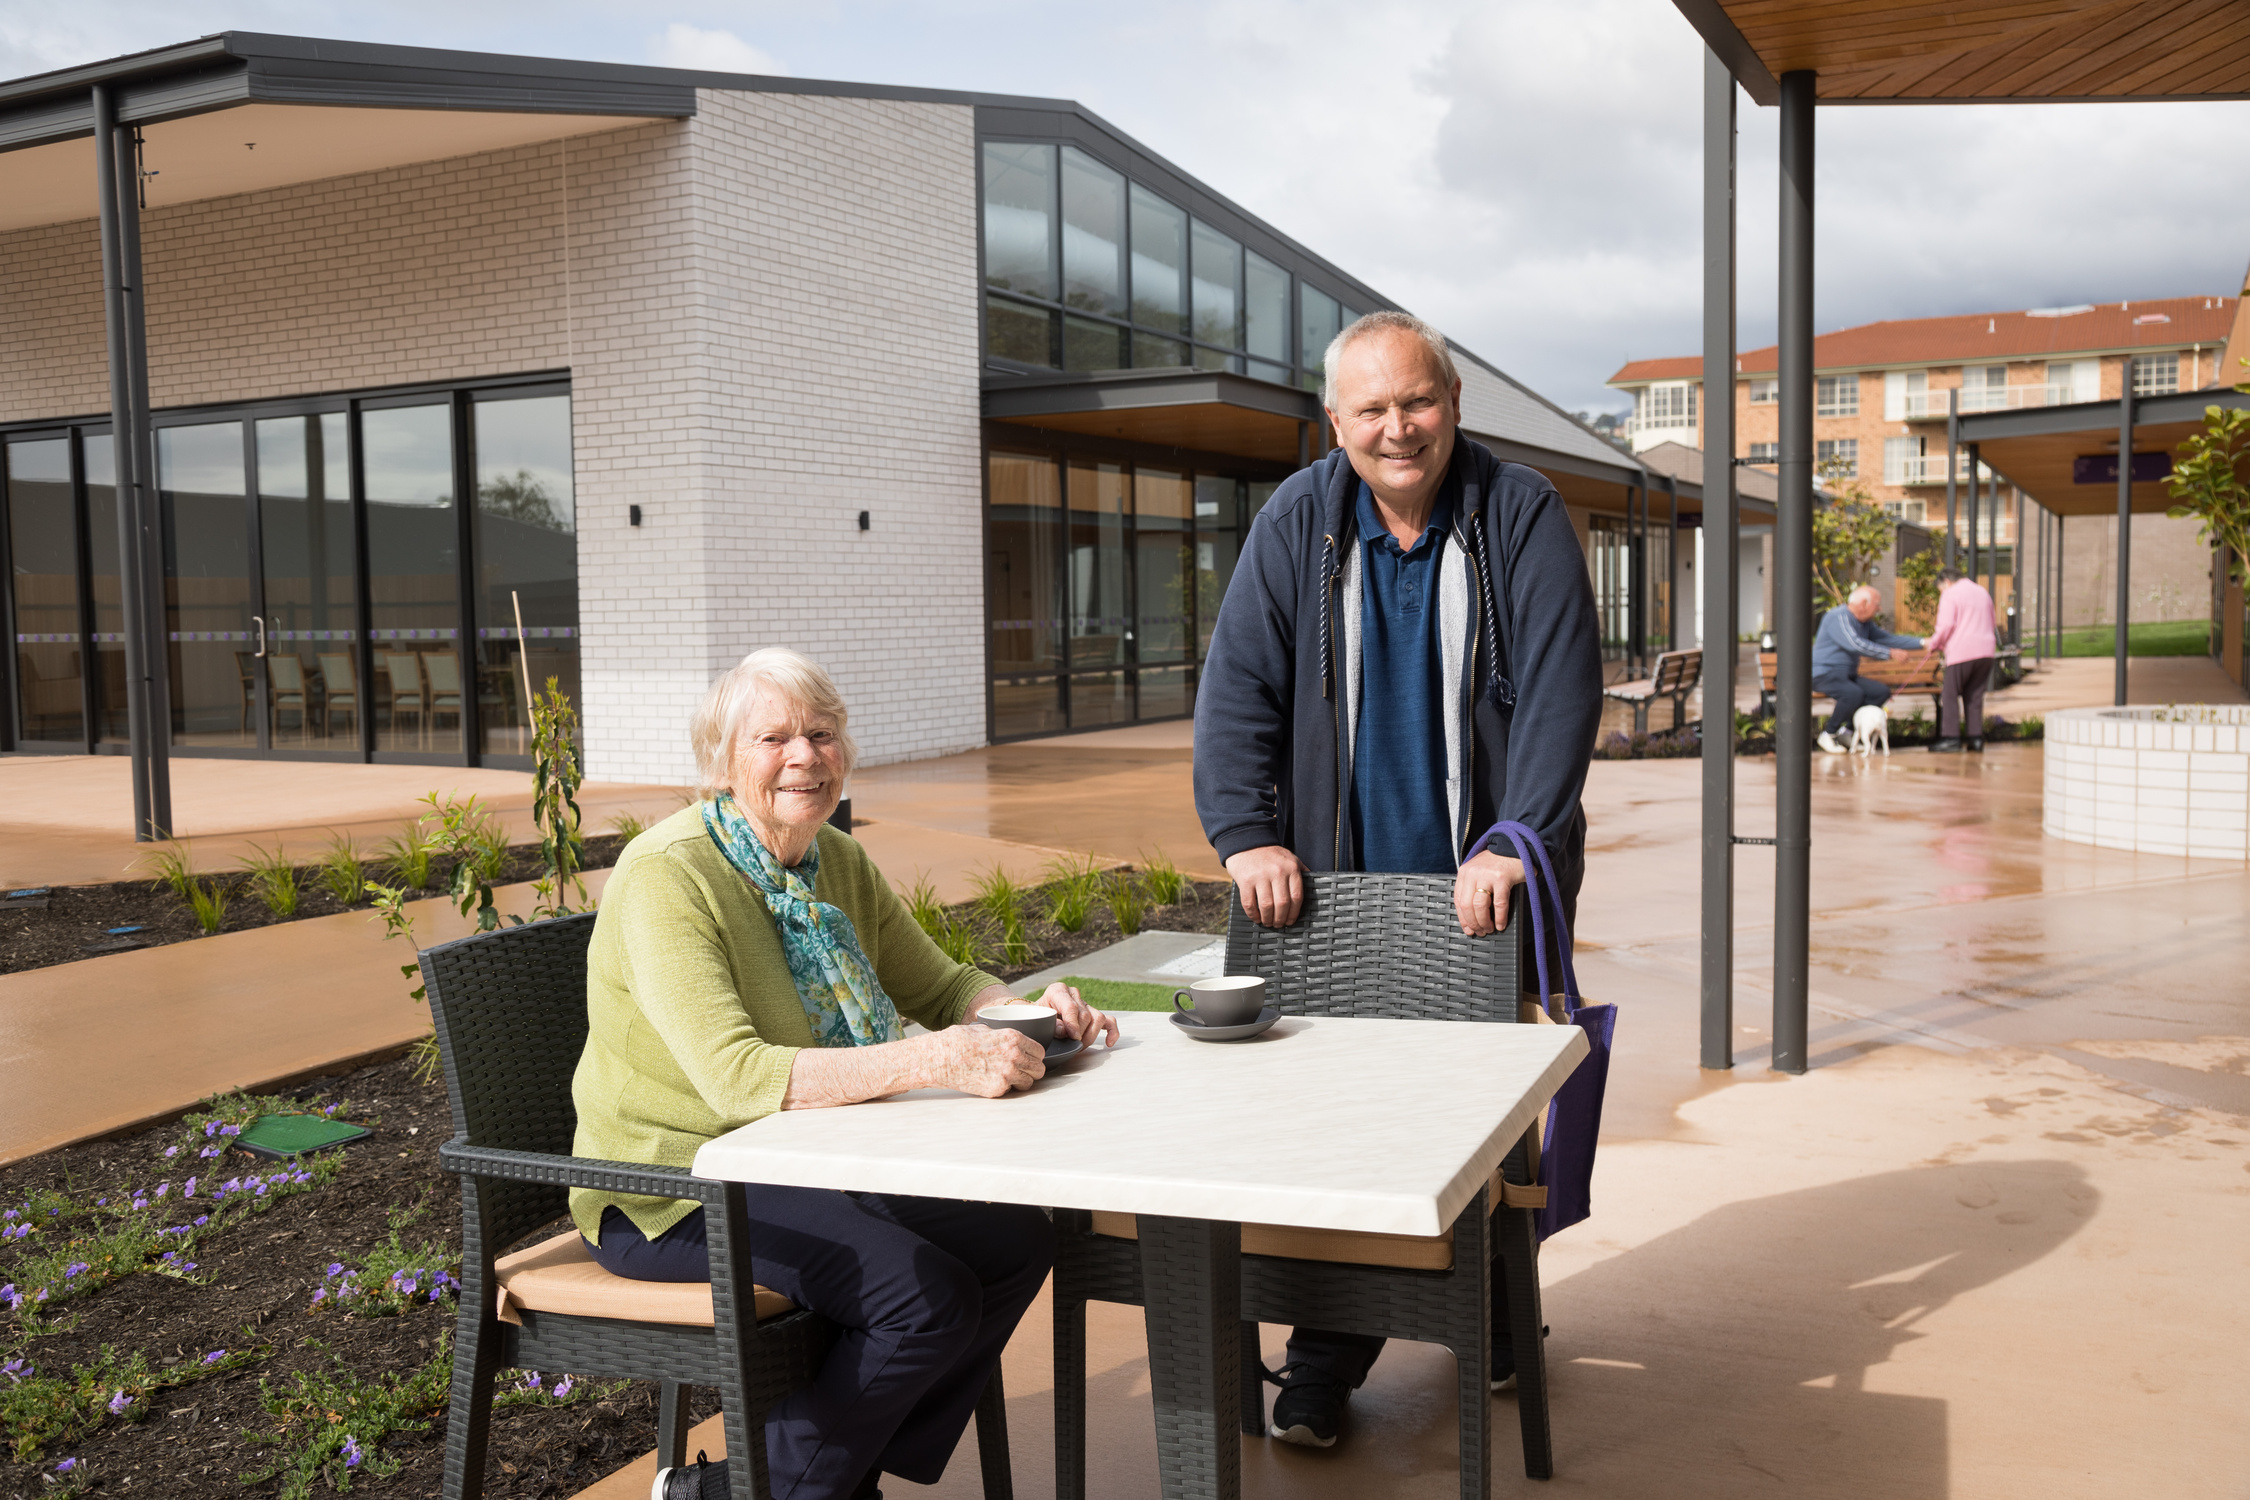 Dementia Australia's Facility could be your Neighbourhood in Retirement